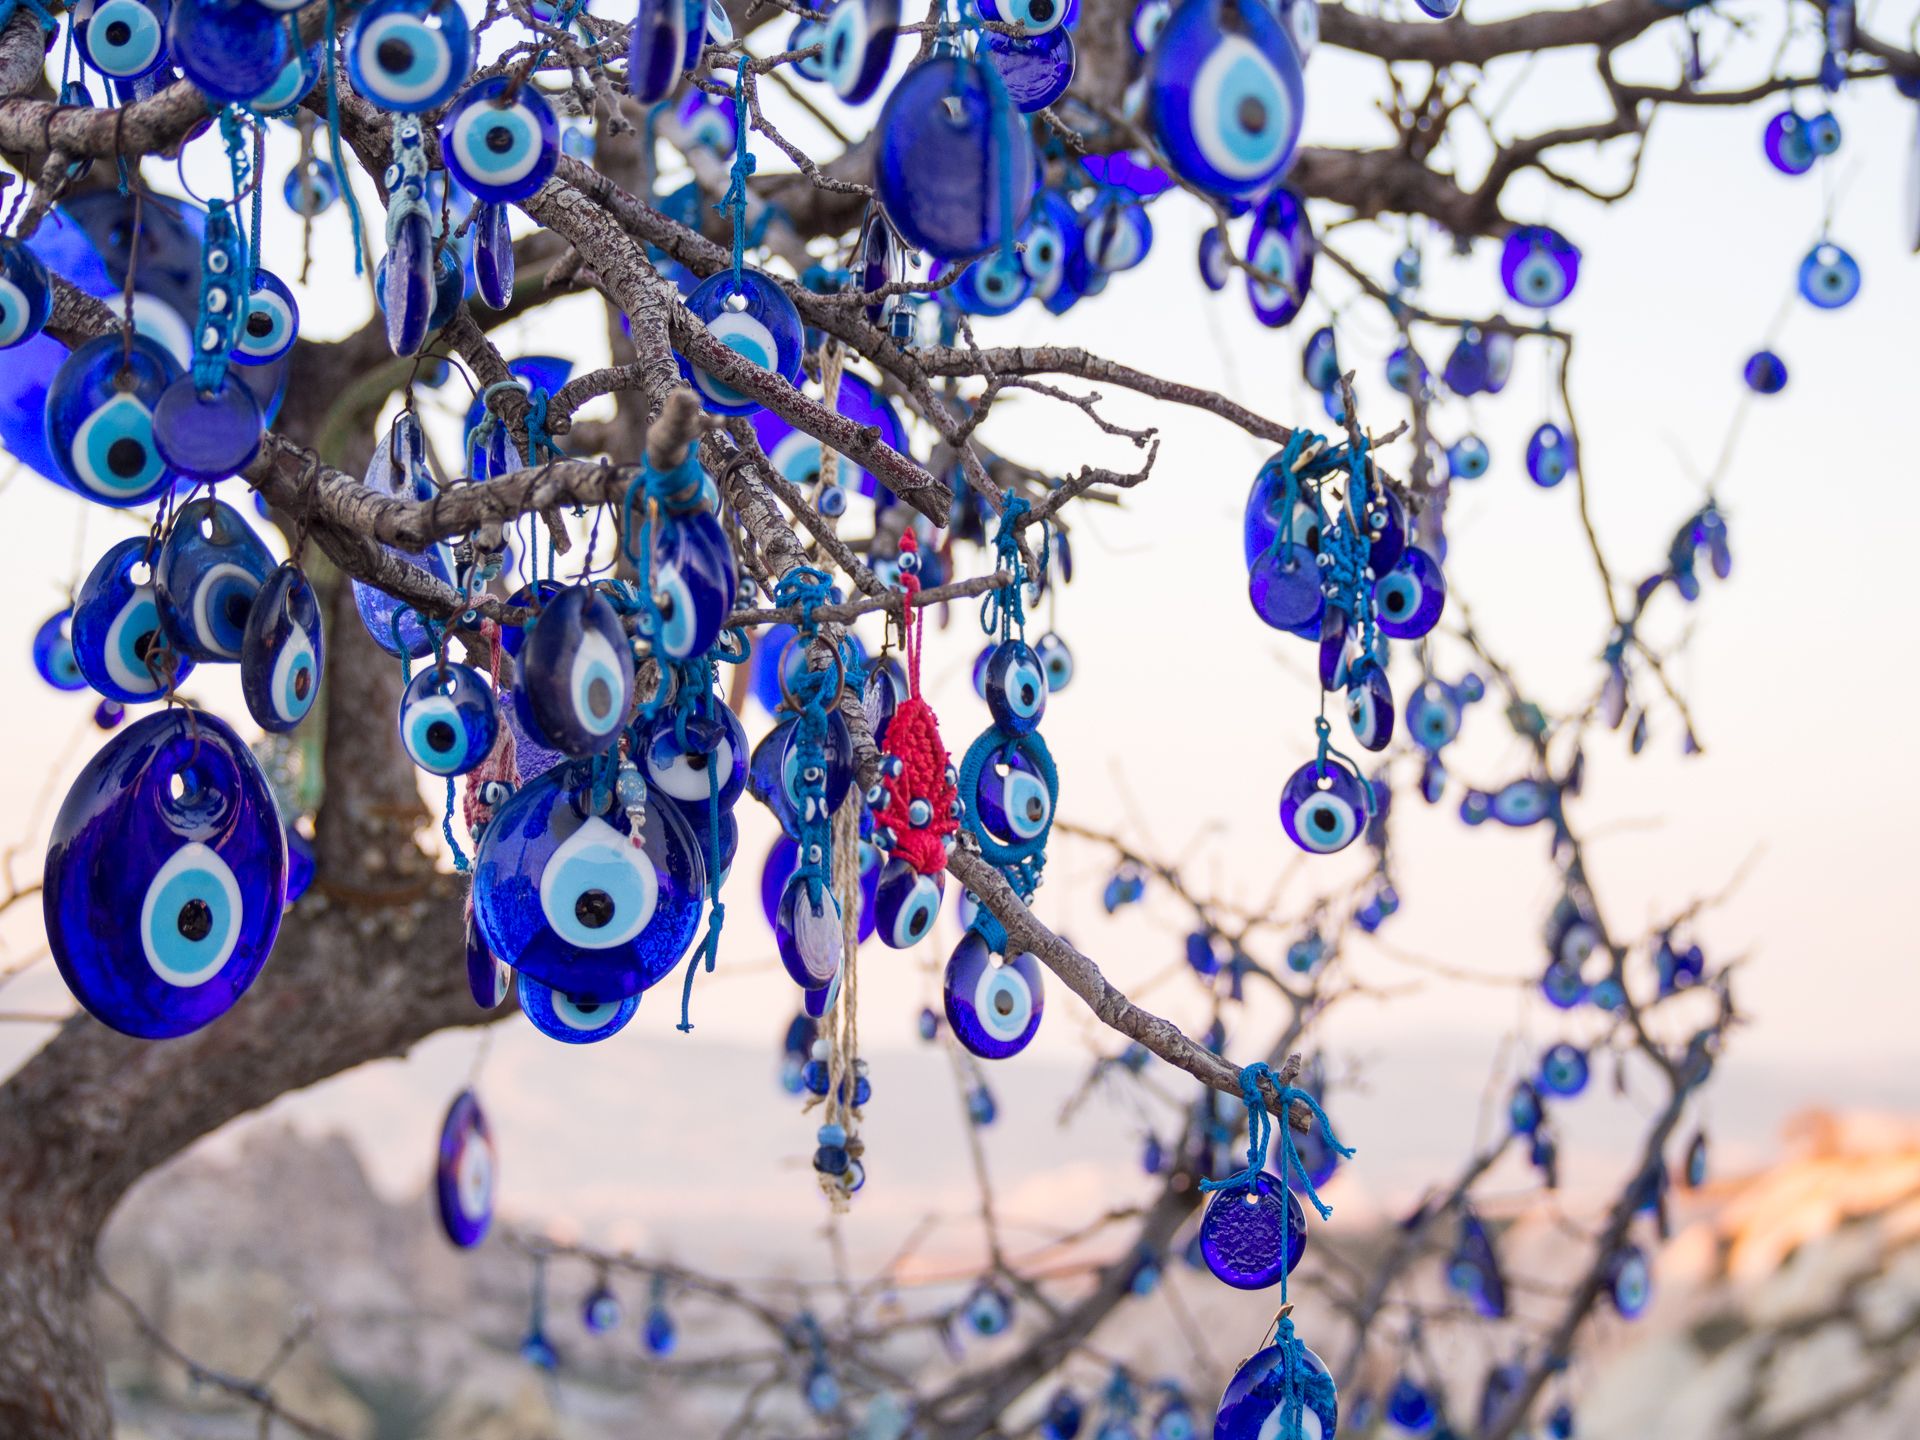 Tree With Nazar (eye Shaped Amulet Believed To Protect Against The Evil Eye)